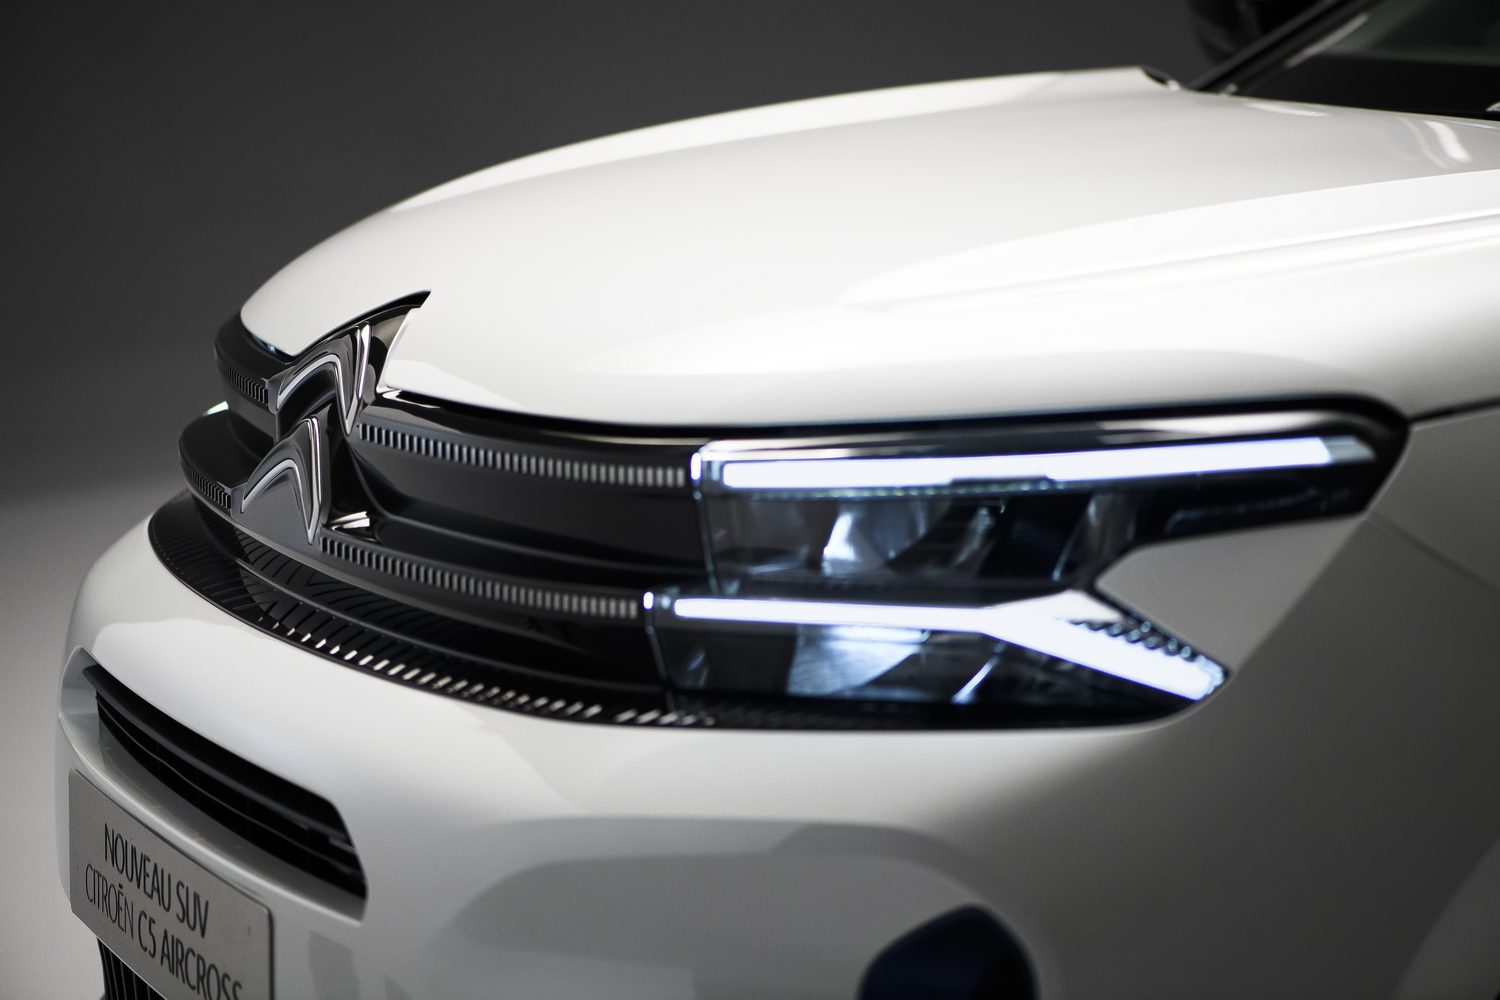 Facelifted Citroen C5 Aircross unveiled